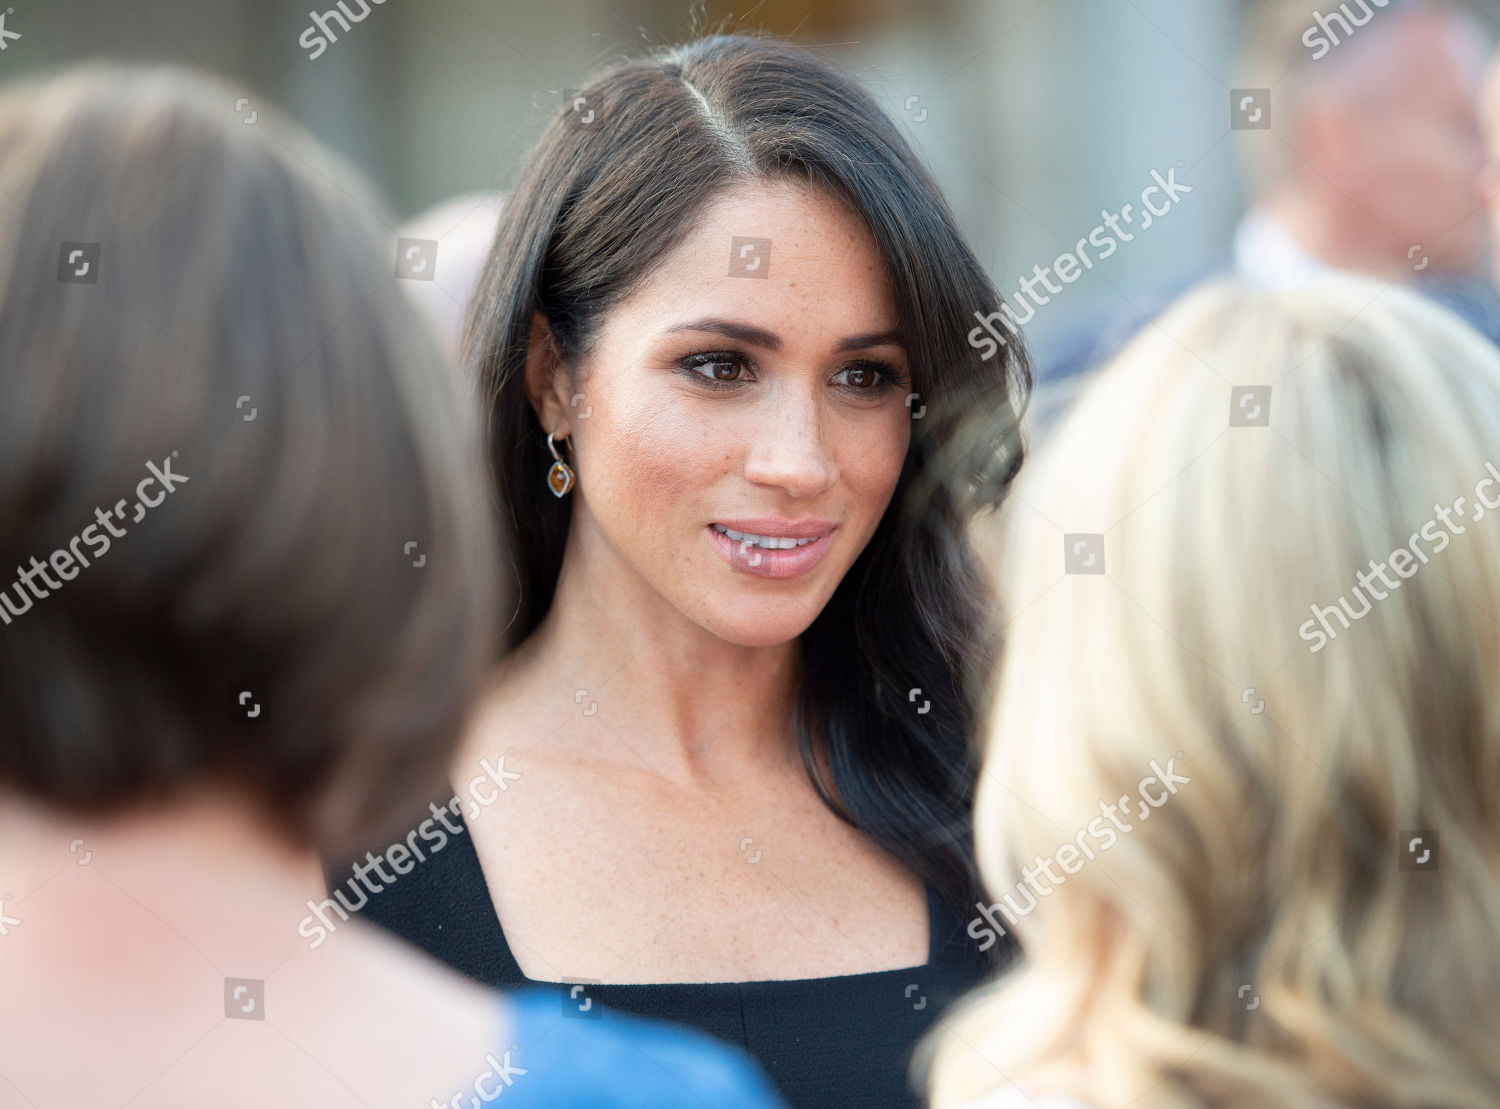 prince-harry-and-meghan-duchess-of-sussex-visit-to-dublin-ireland-shutterstock-editorial-9754264h.jpg